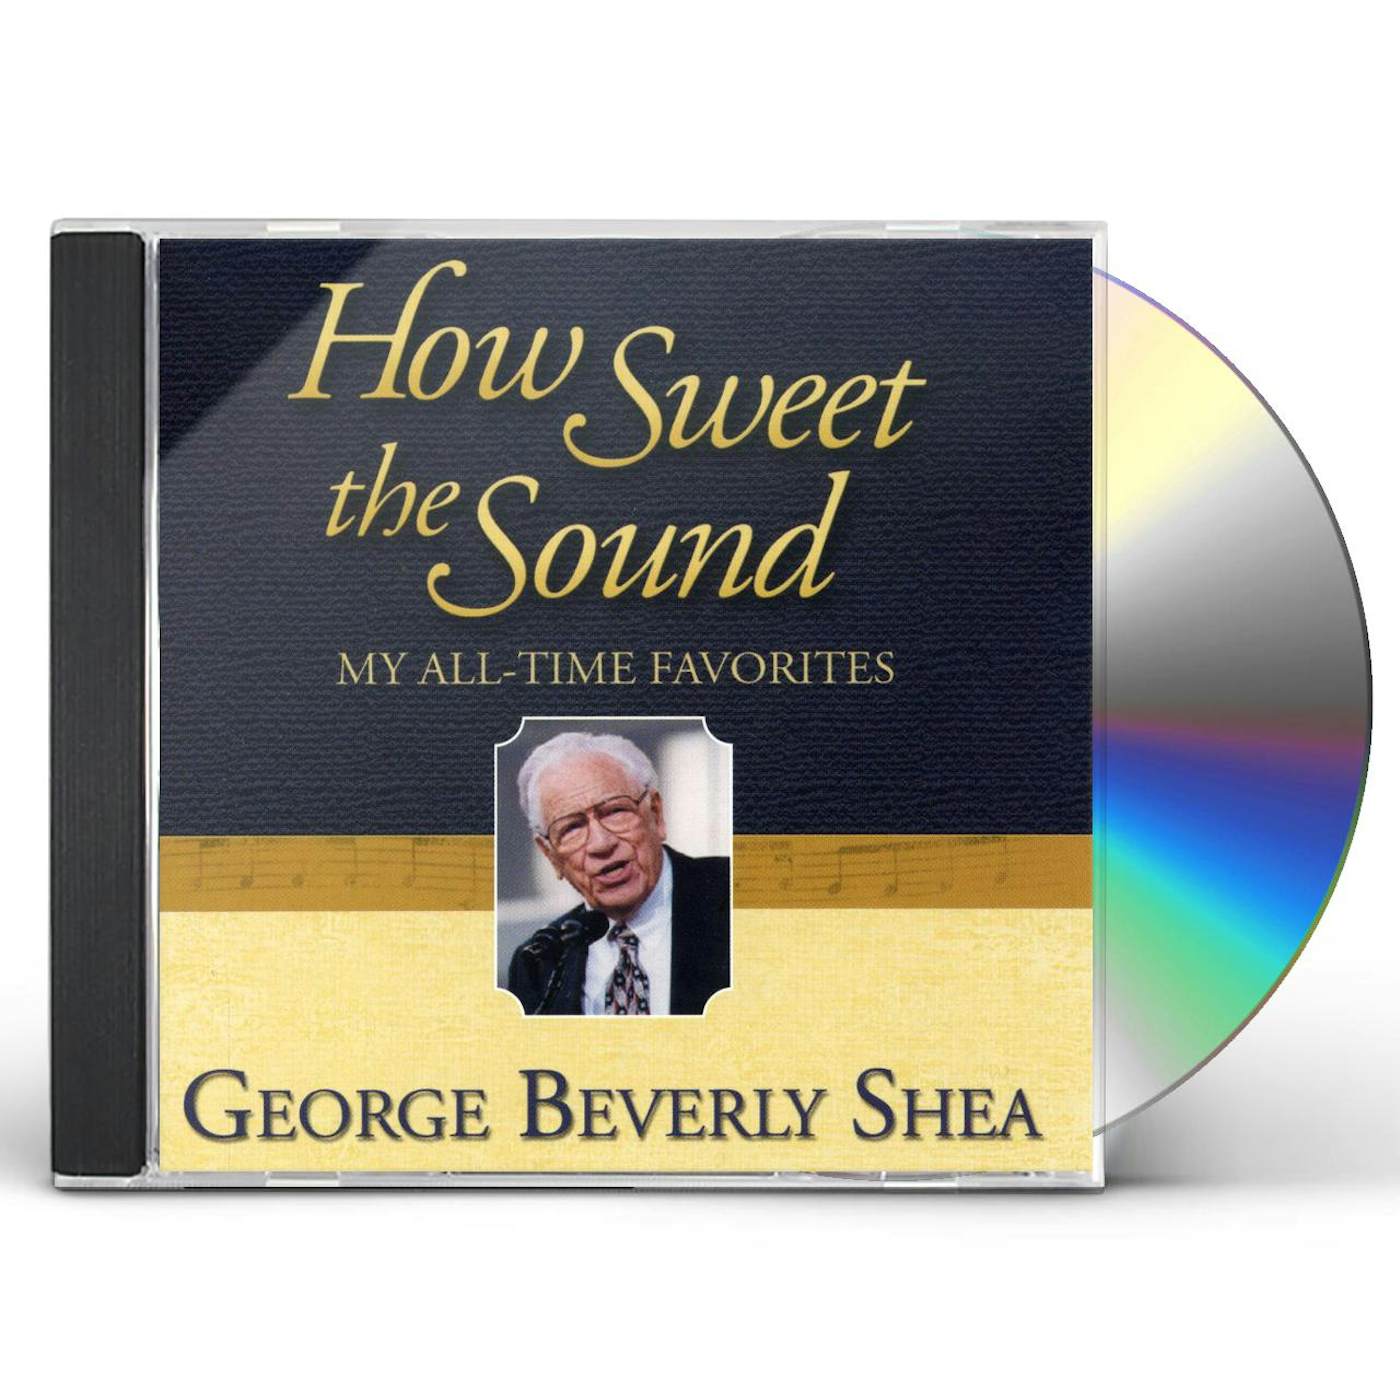 George Beverly Shea HOW SWEET THE SOUND: MY ALL-TIME FAVORITES CD